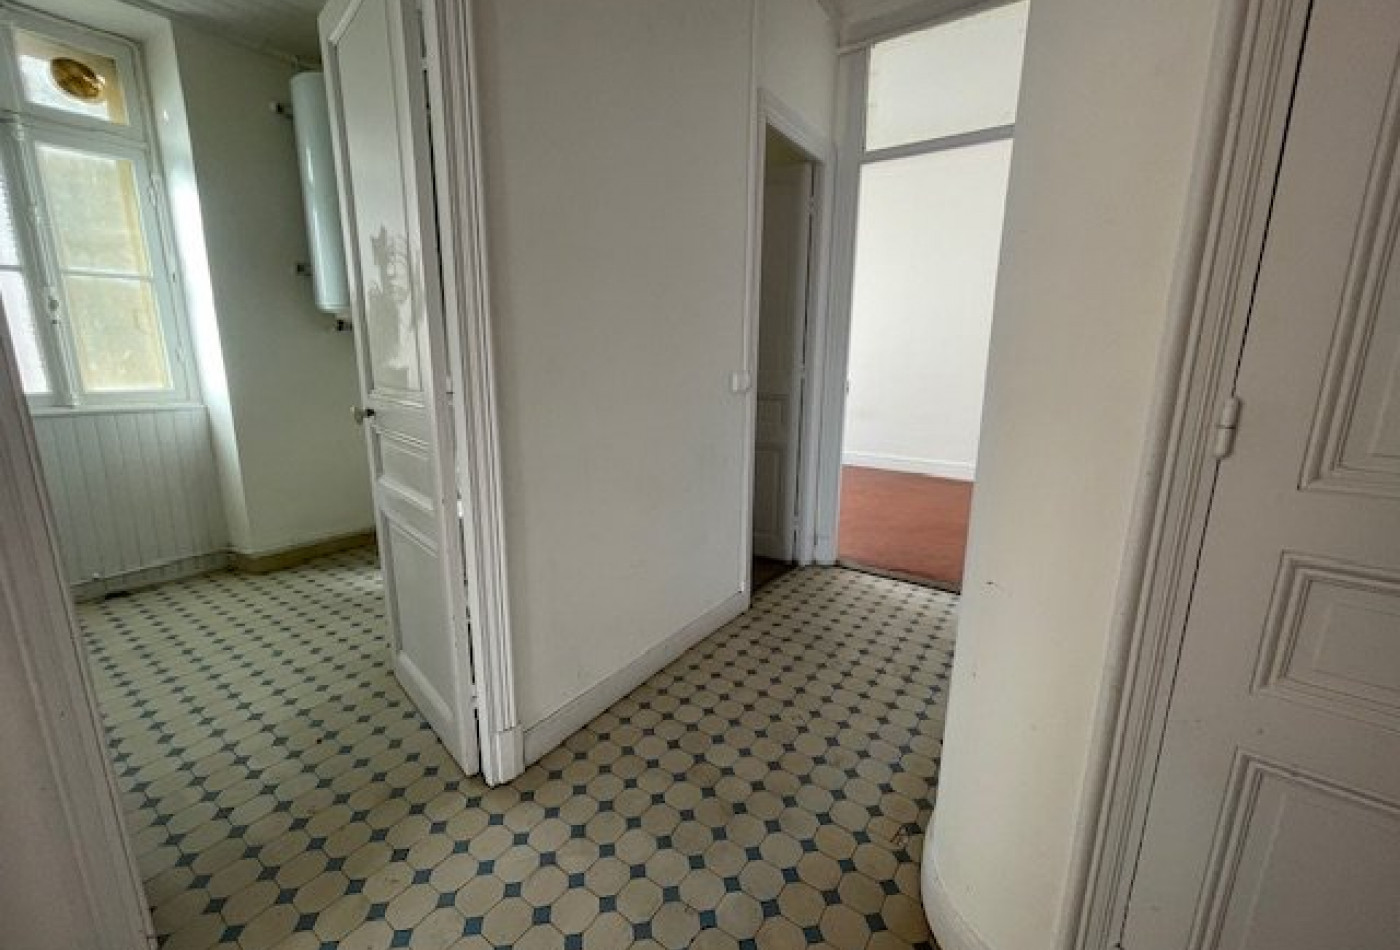  vendre Appartement bourgeois Nice